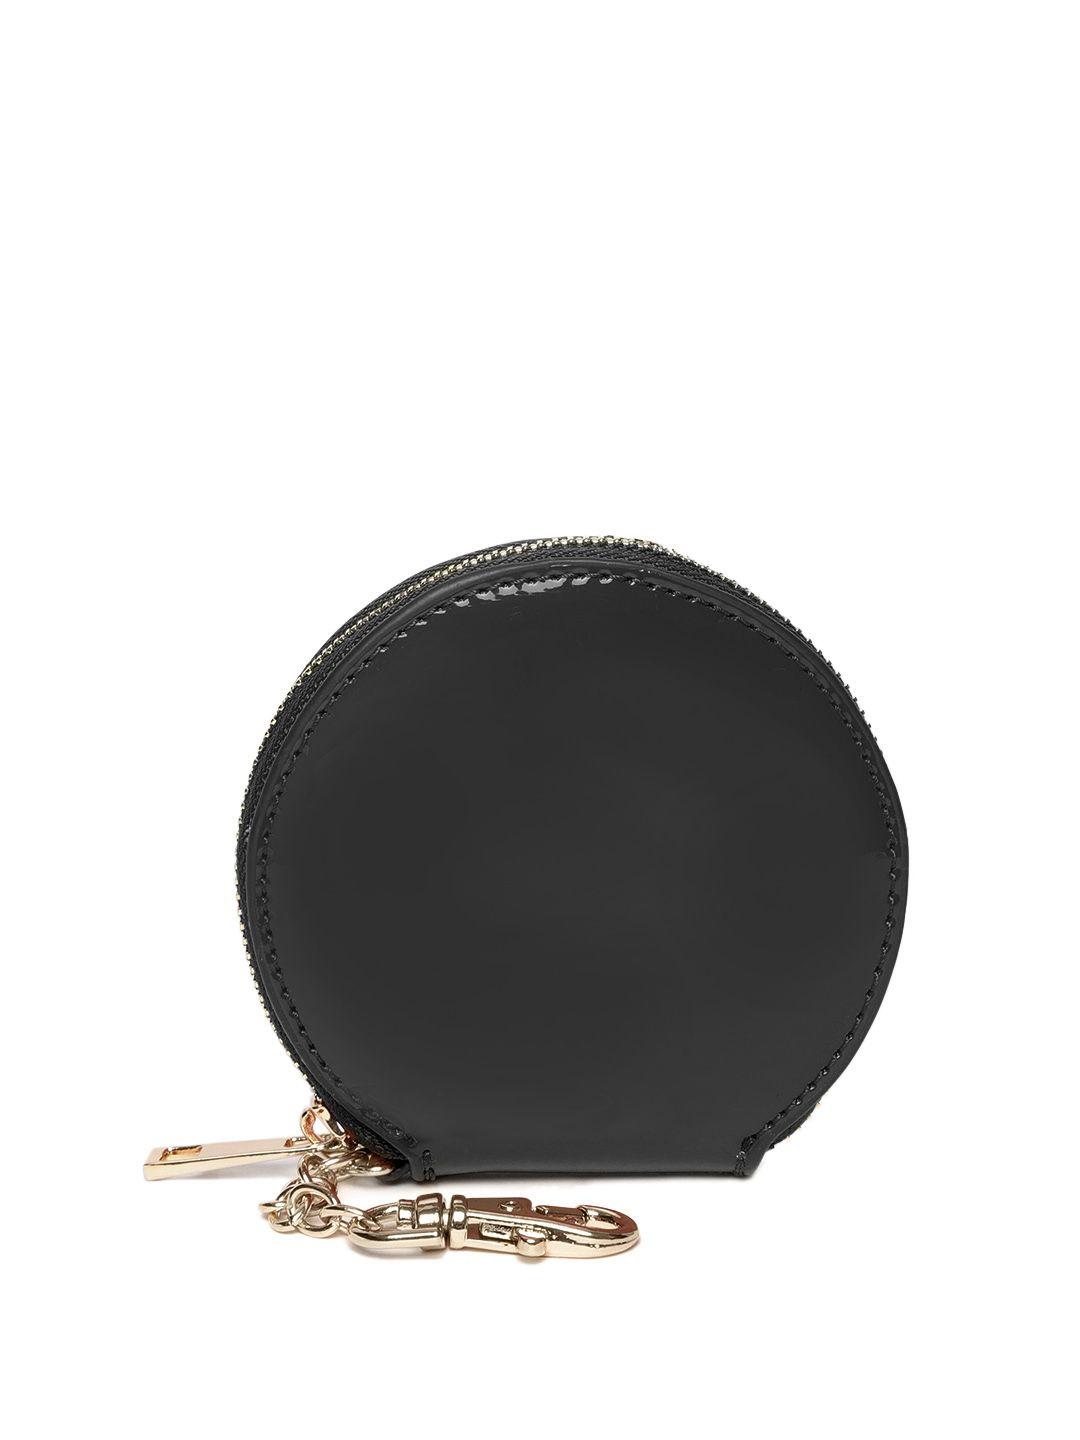 forever-21-black-solid-coin-purse